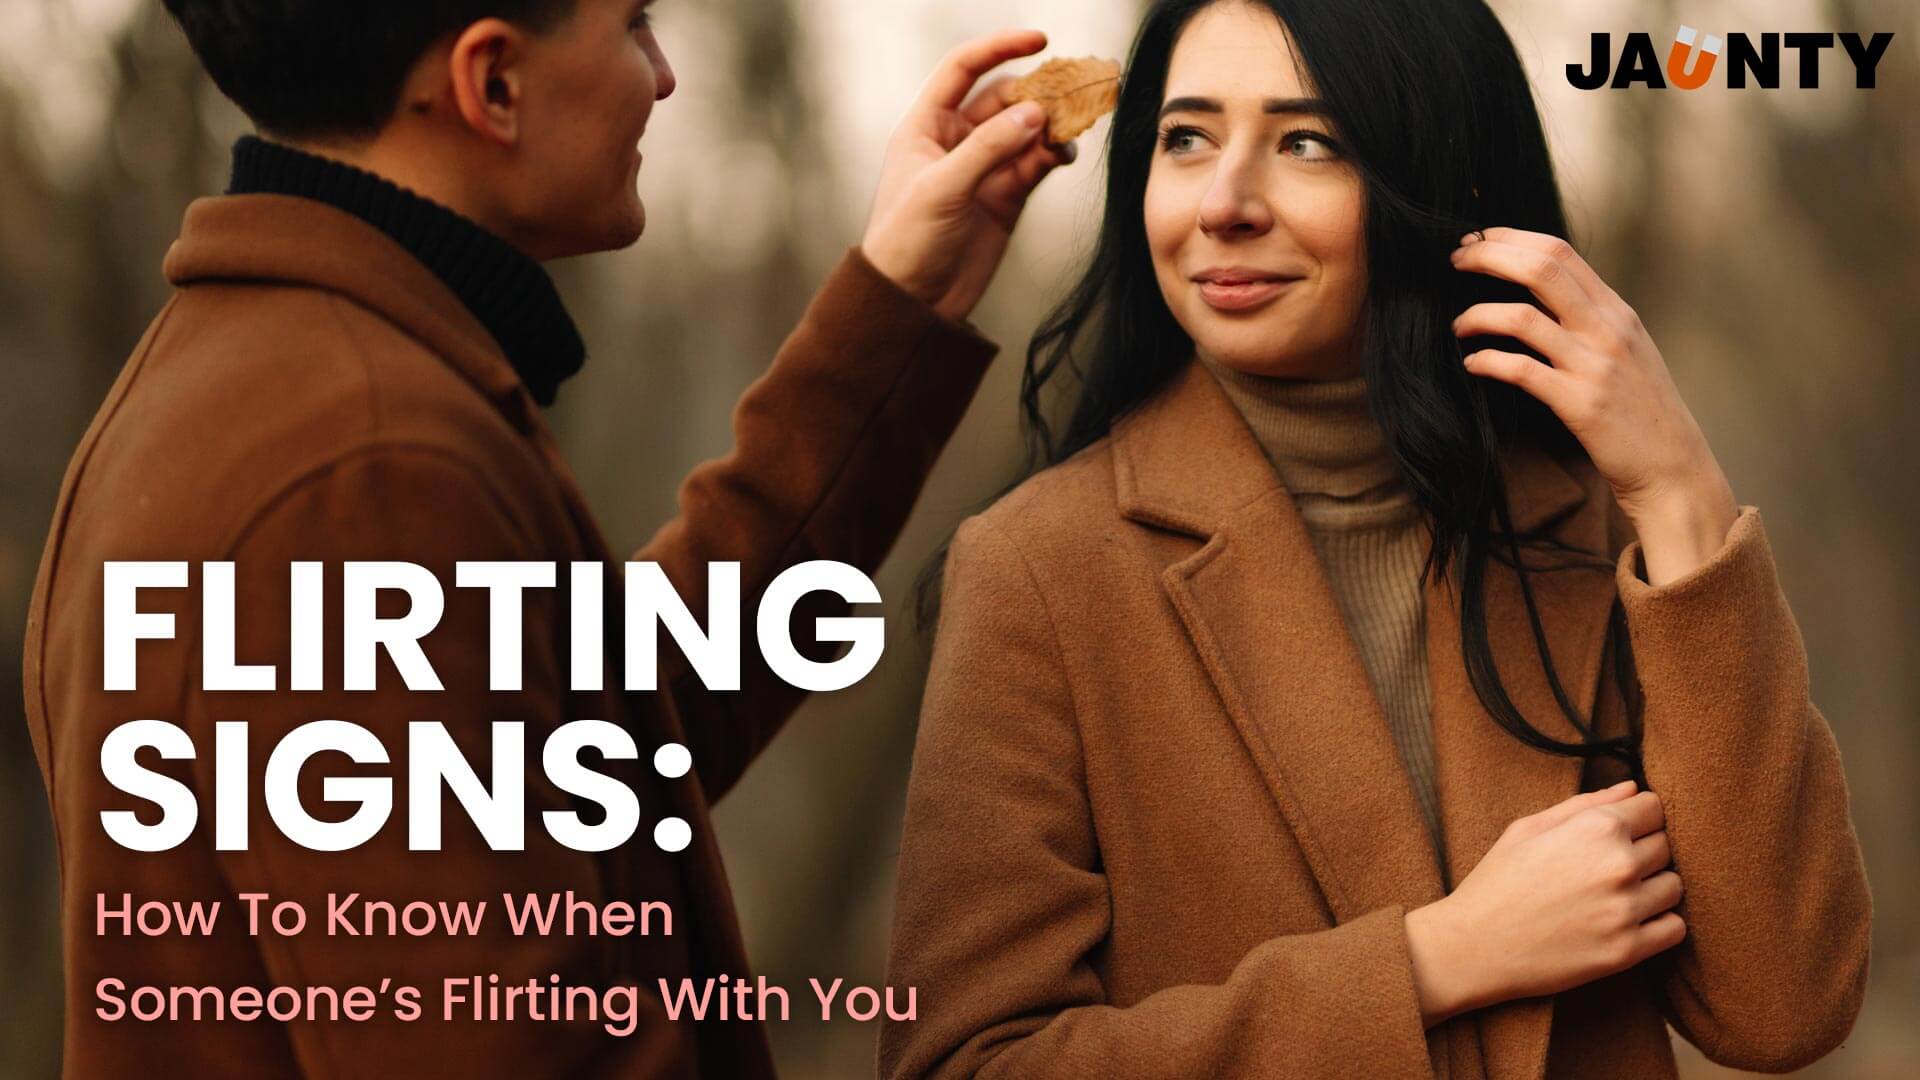 Flirting signs: How to know when someone is flirting with you